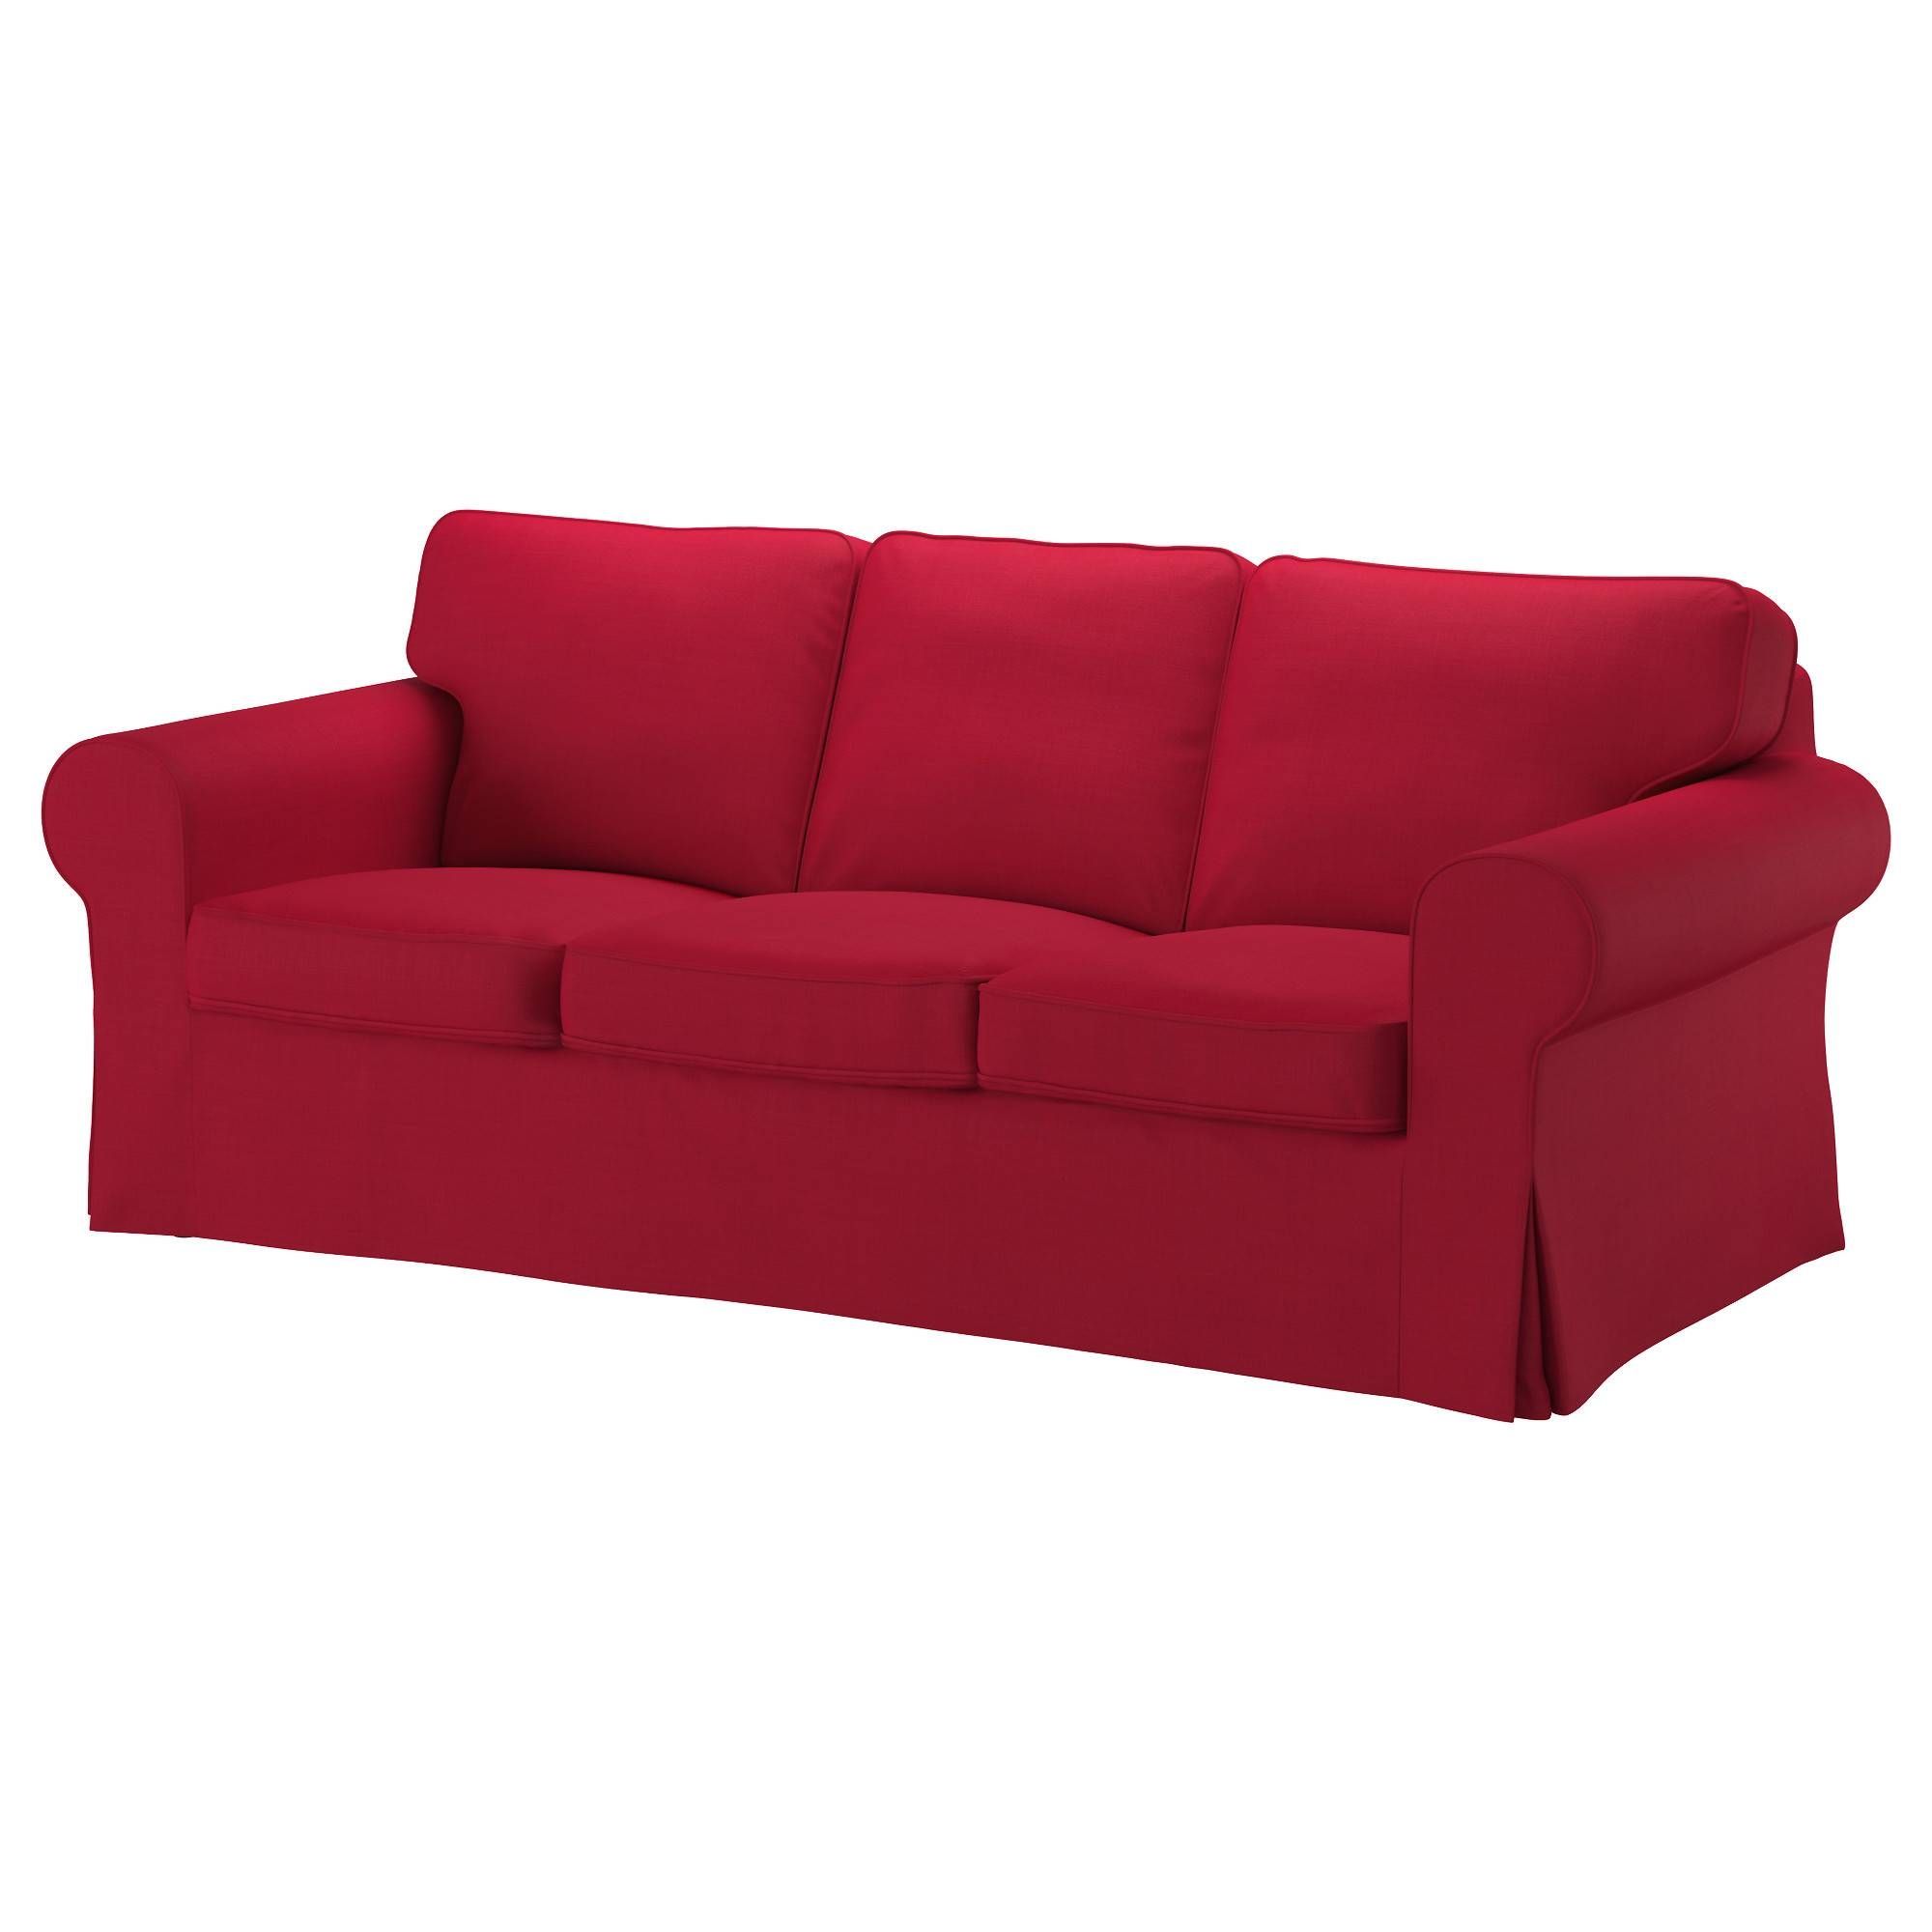 Sofas Center : 0397274 Pe564503 S5 Jpg Ektorp Sofa Cover Lofallet Within Arm Covers For Sofas (View 26 of 30)